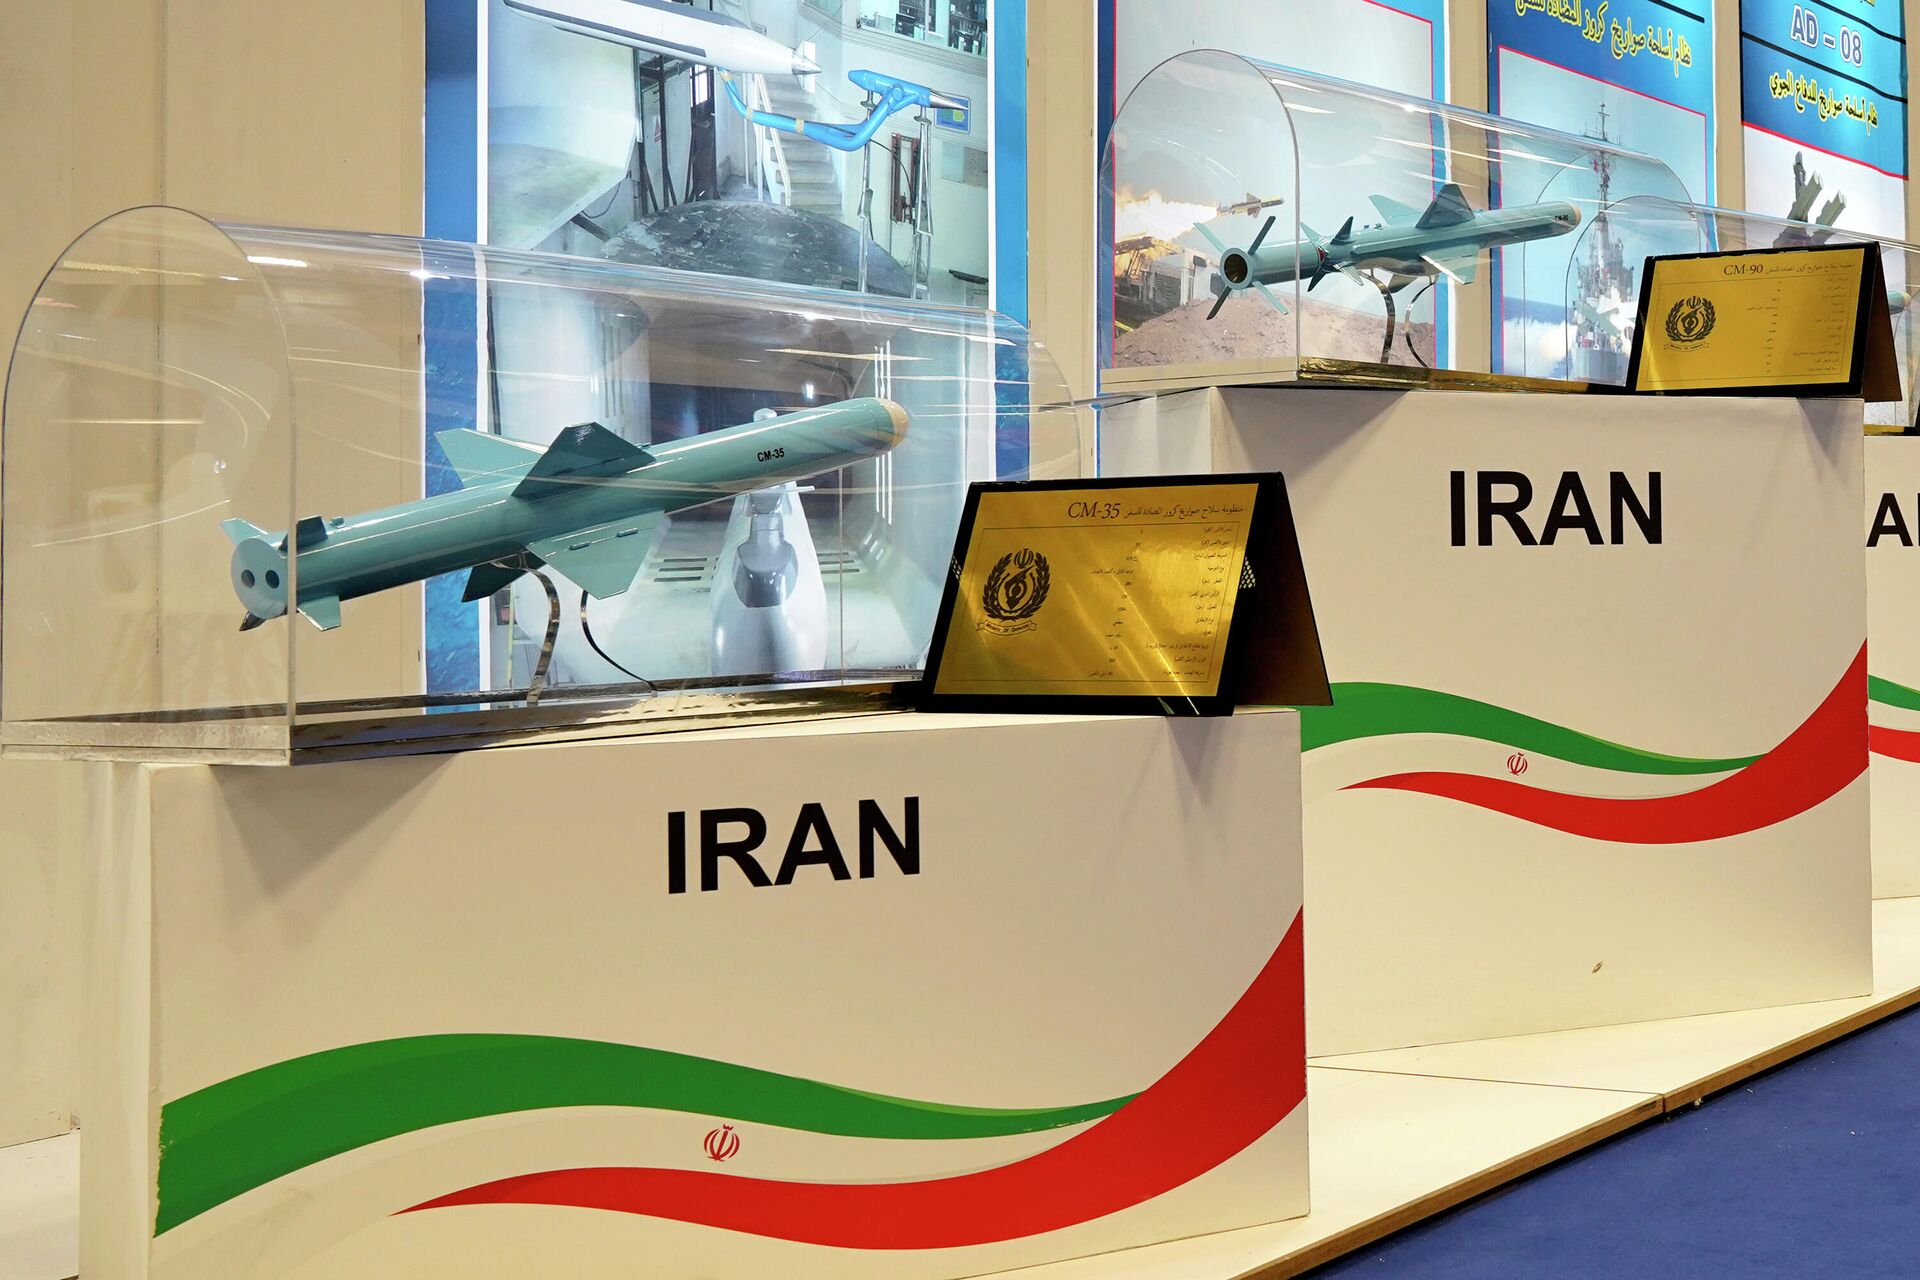 Two different models of Iranian Nasr-1 anti-ship cruise missiles are seen at a stand at the DIMDEX exhibition in Doha, Qatar, Wednesday, March 23, 2022. - Sputnik International, 1920, 23.03.2022